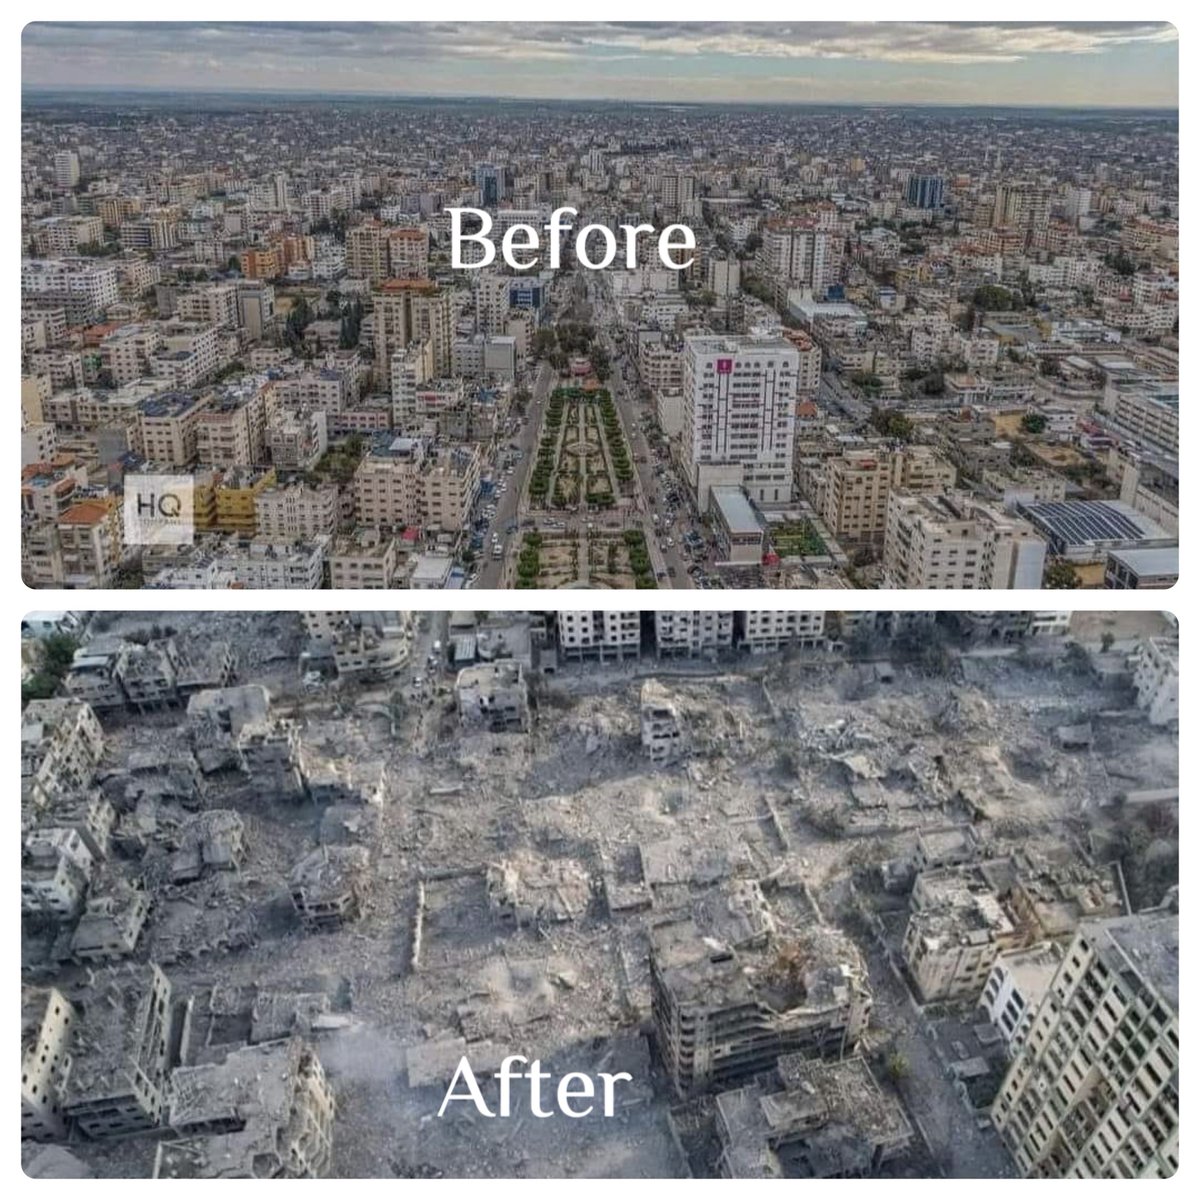 I know many of us don’t call Gaza home, don’t know what it’s Supposed to look like, but I need everyone to focus and to NOT to accept this devastation and destruction as ‘what Gaza is.’ A city isn’t supposed to look like an architectural graveyard. Just look #AltTextPalestine